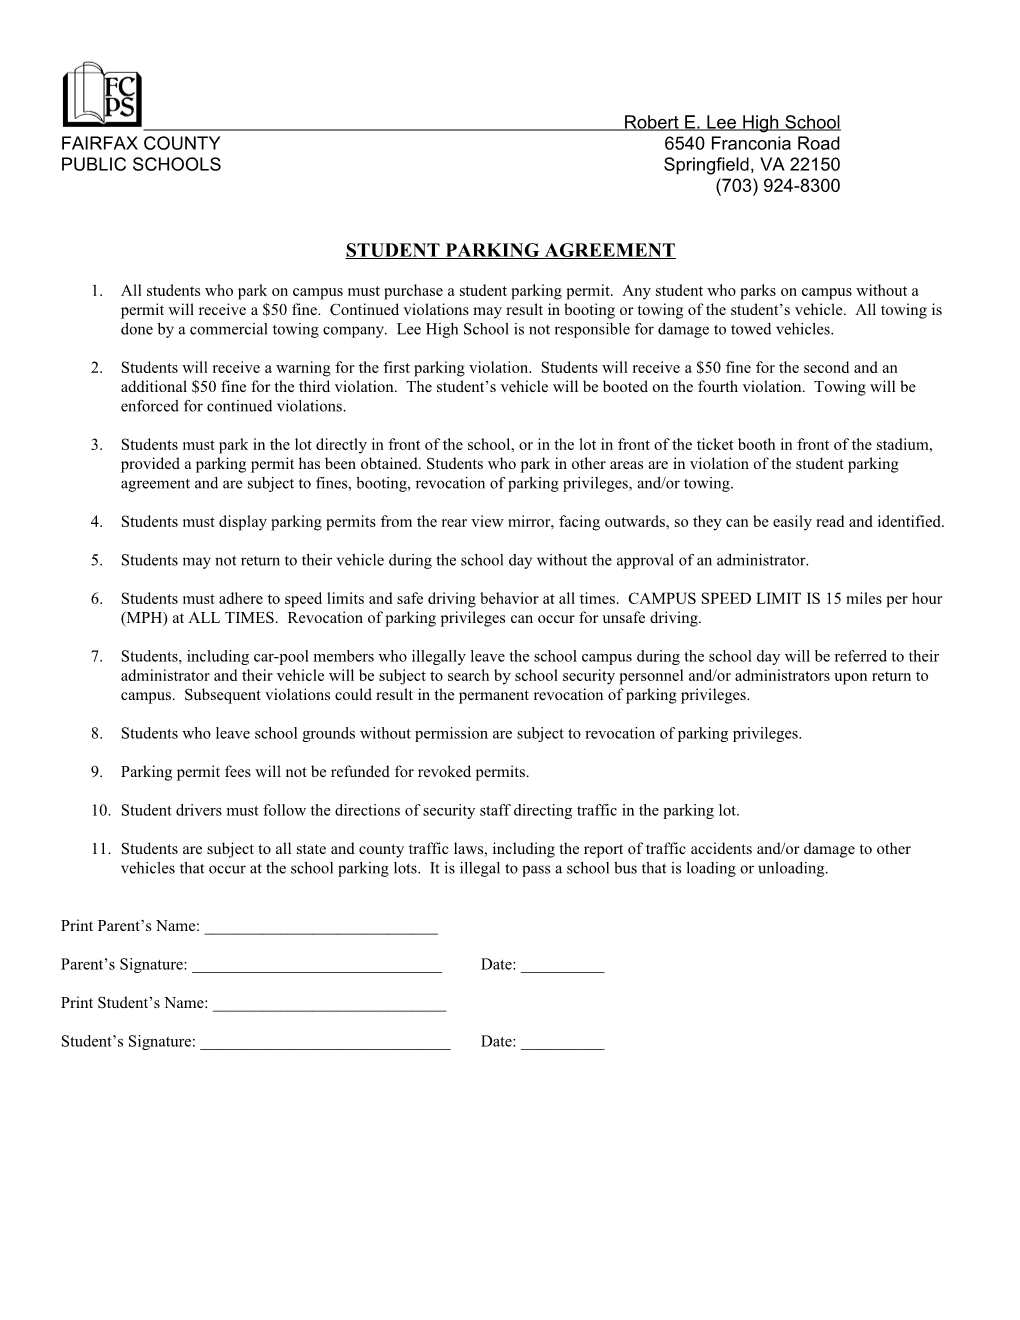 Student Parking Agreement